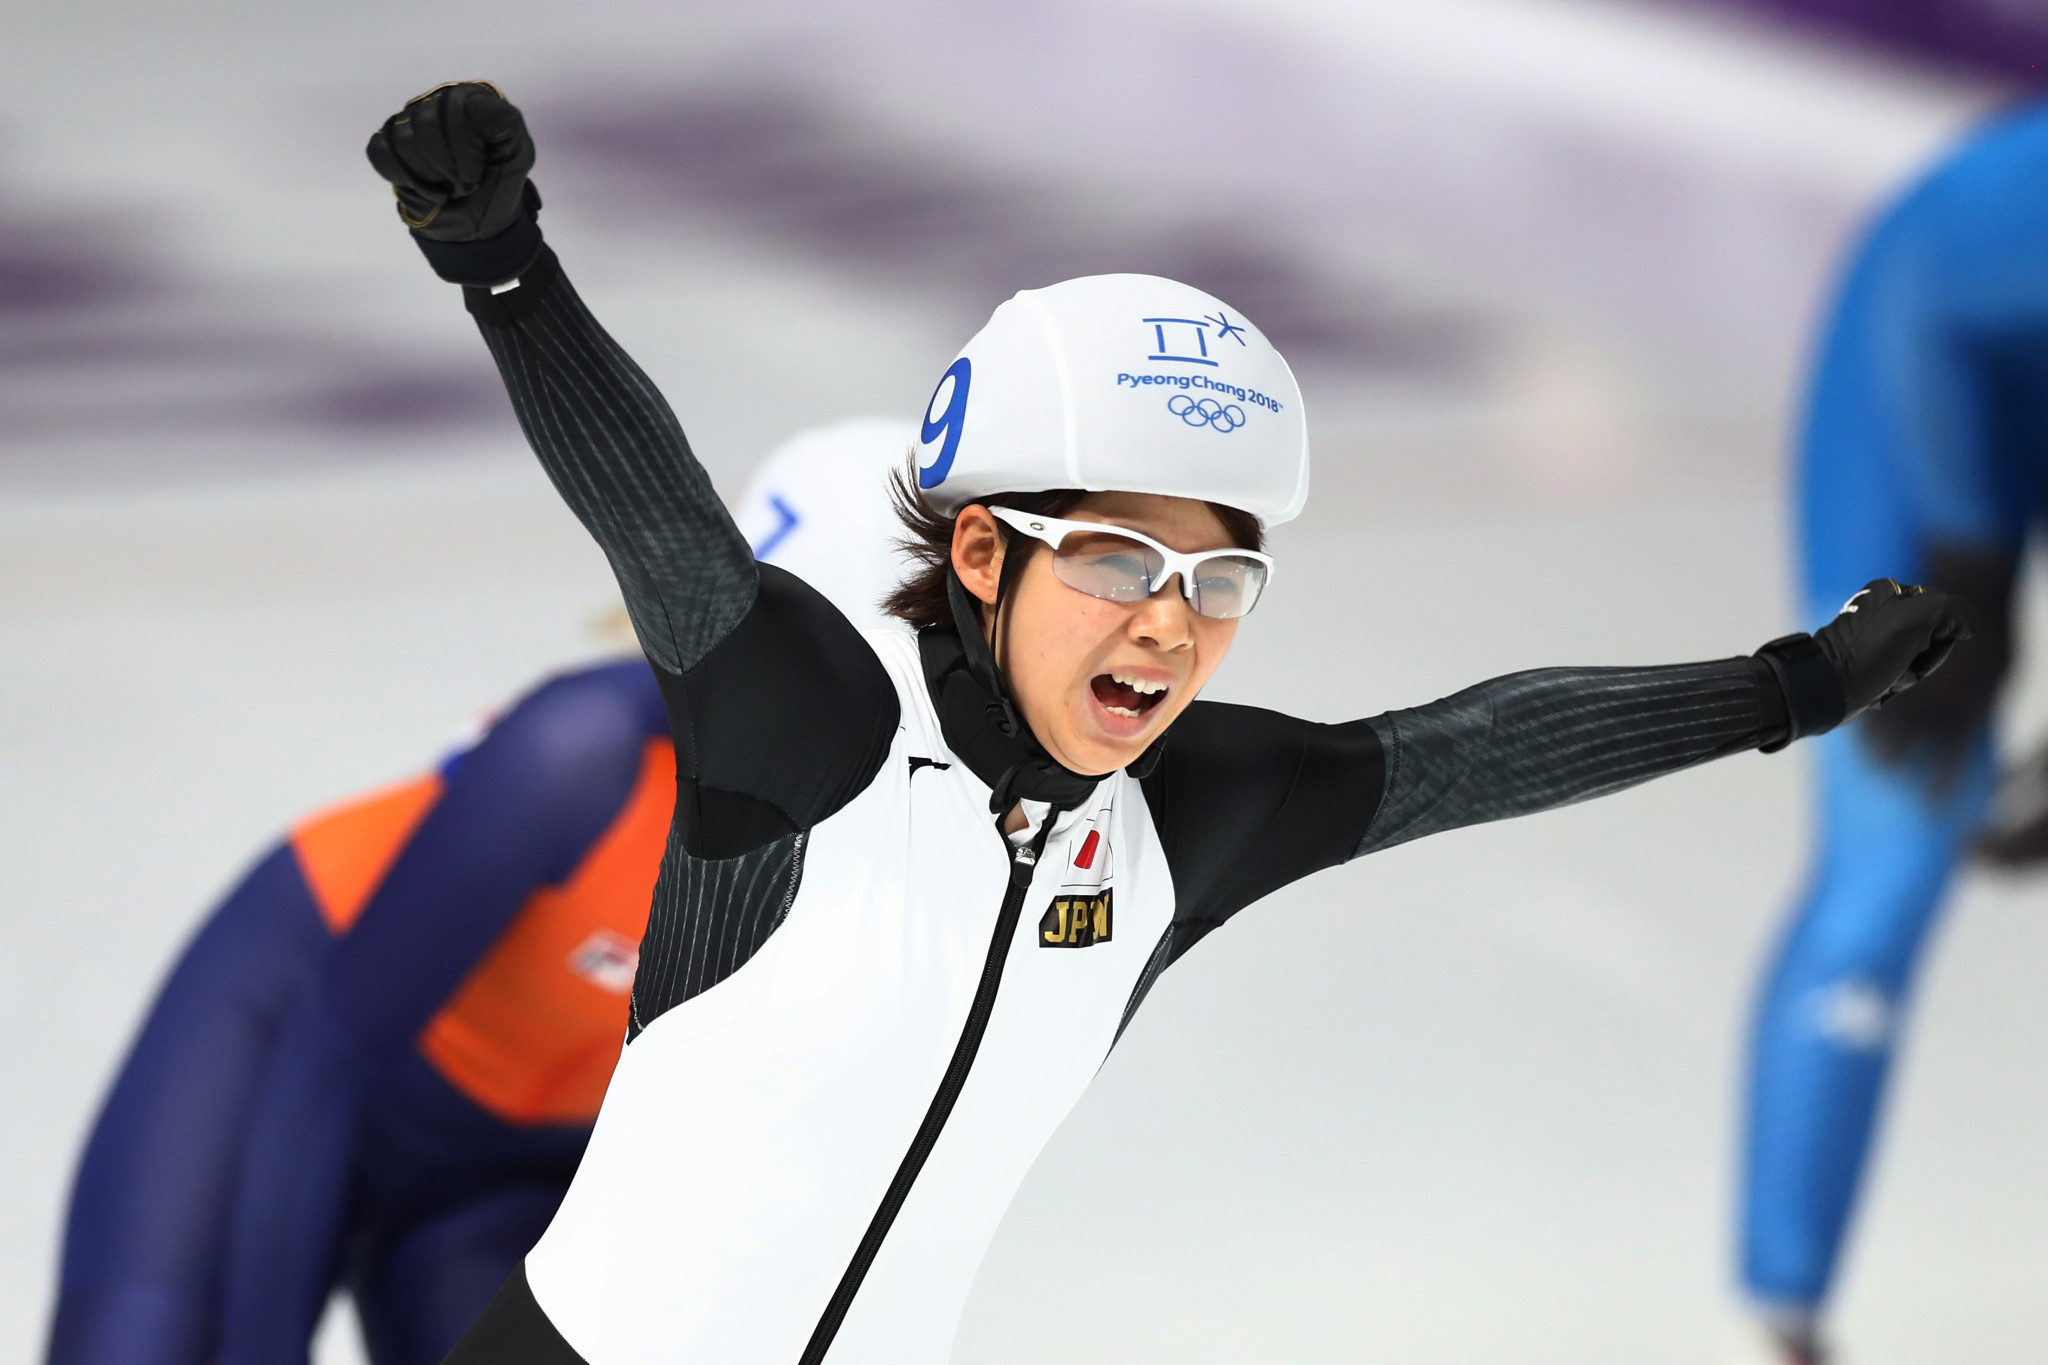 Japan’s Nana Takagi came out on top in the women's mass start speed skating event to claim her second gold medal ©Getty Images